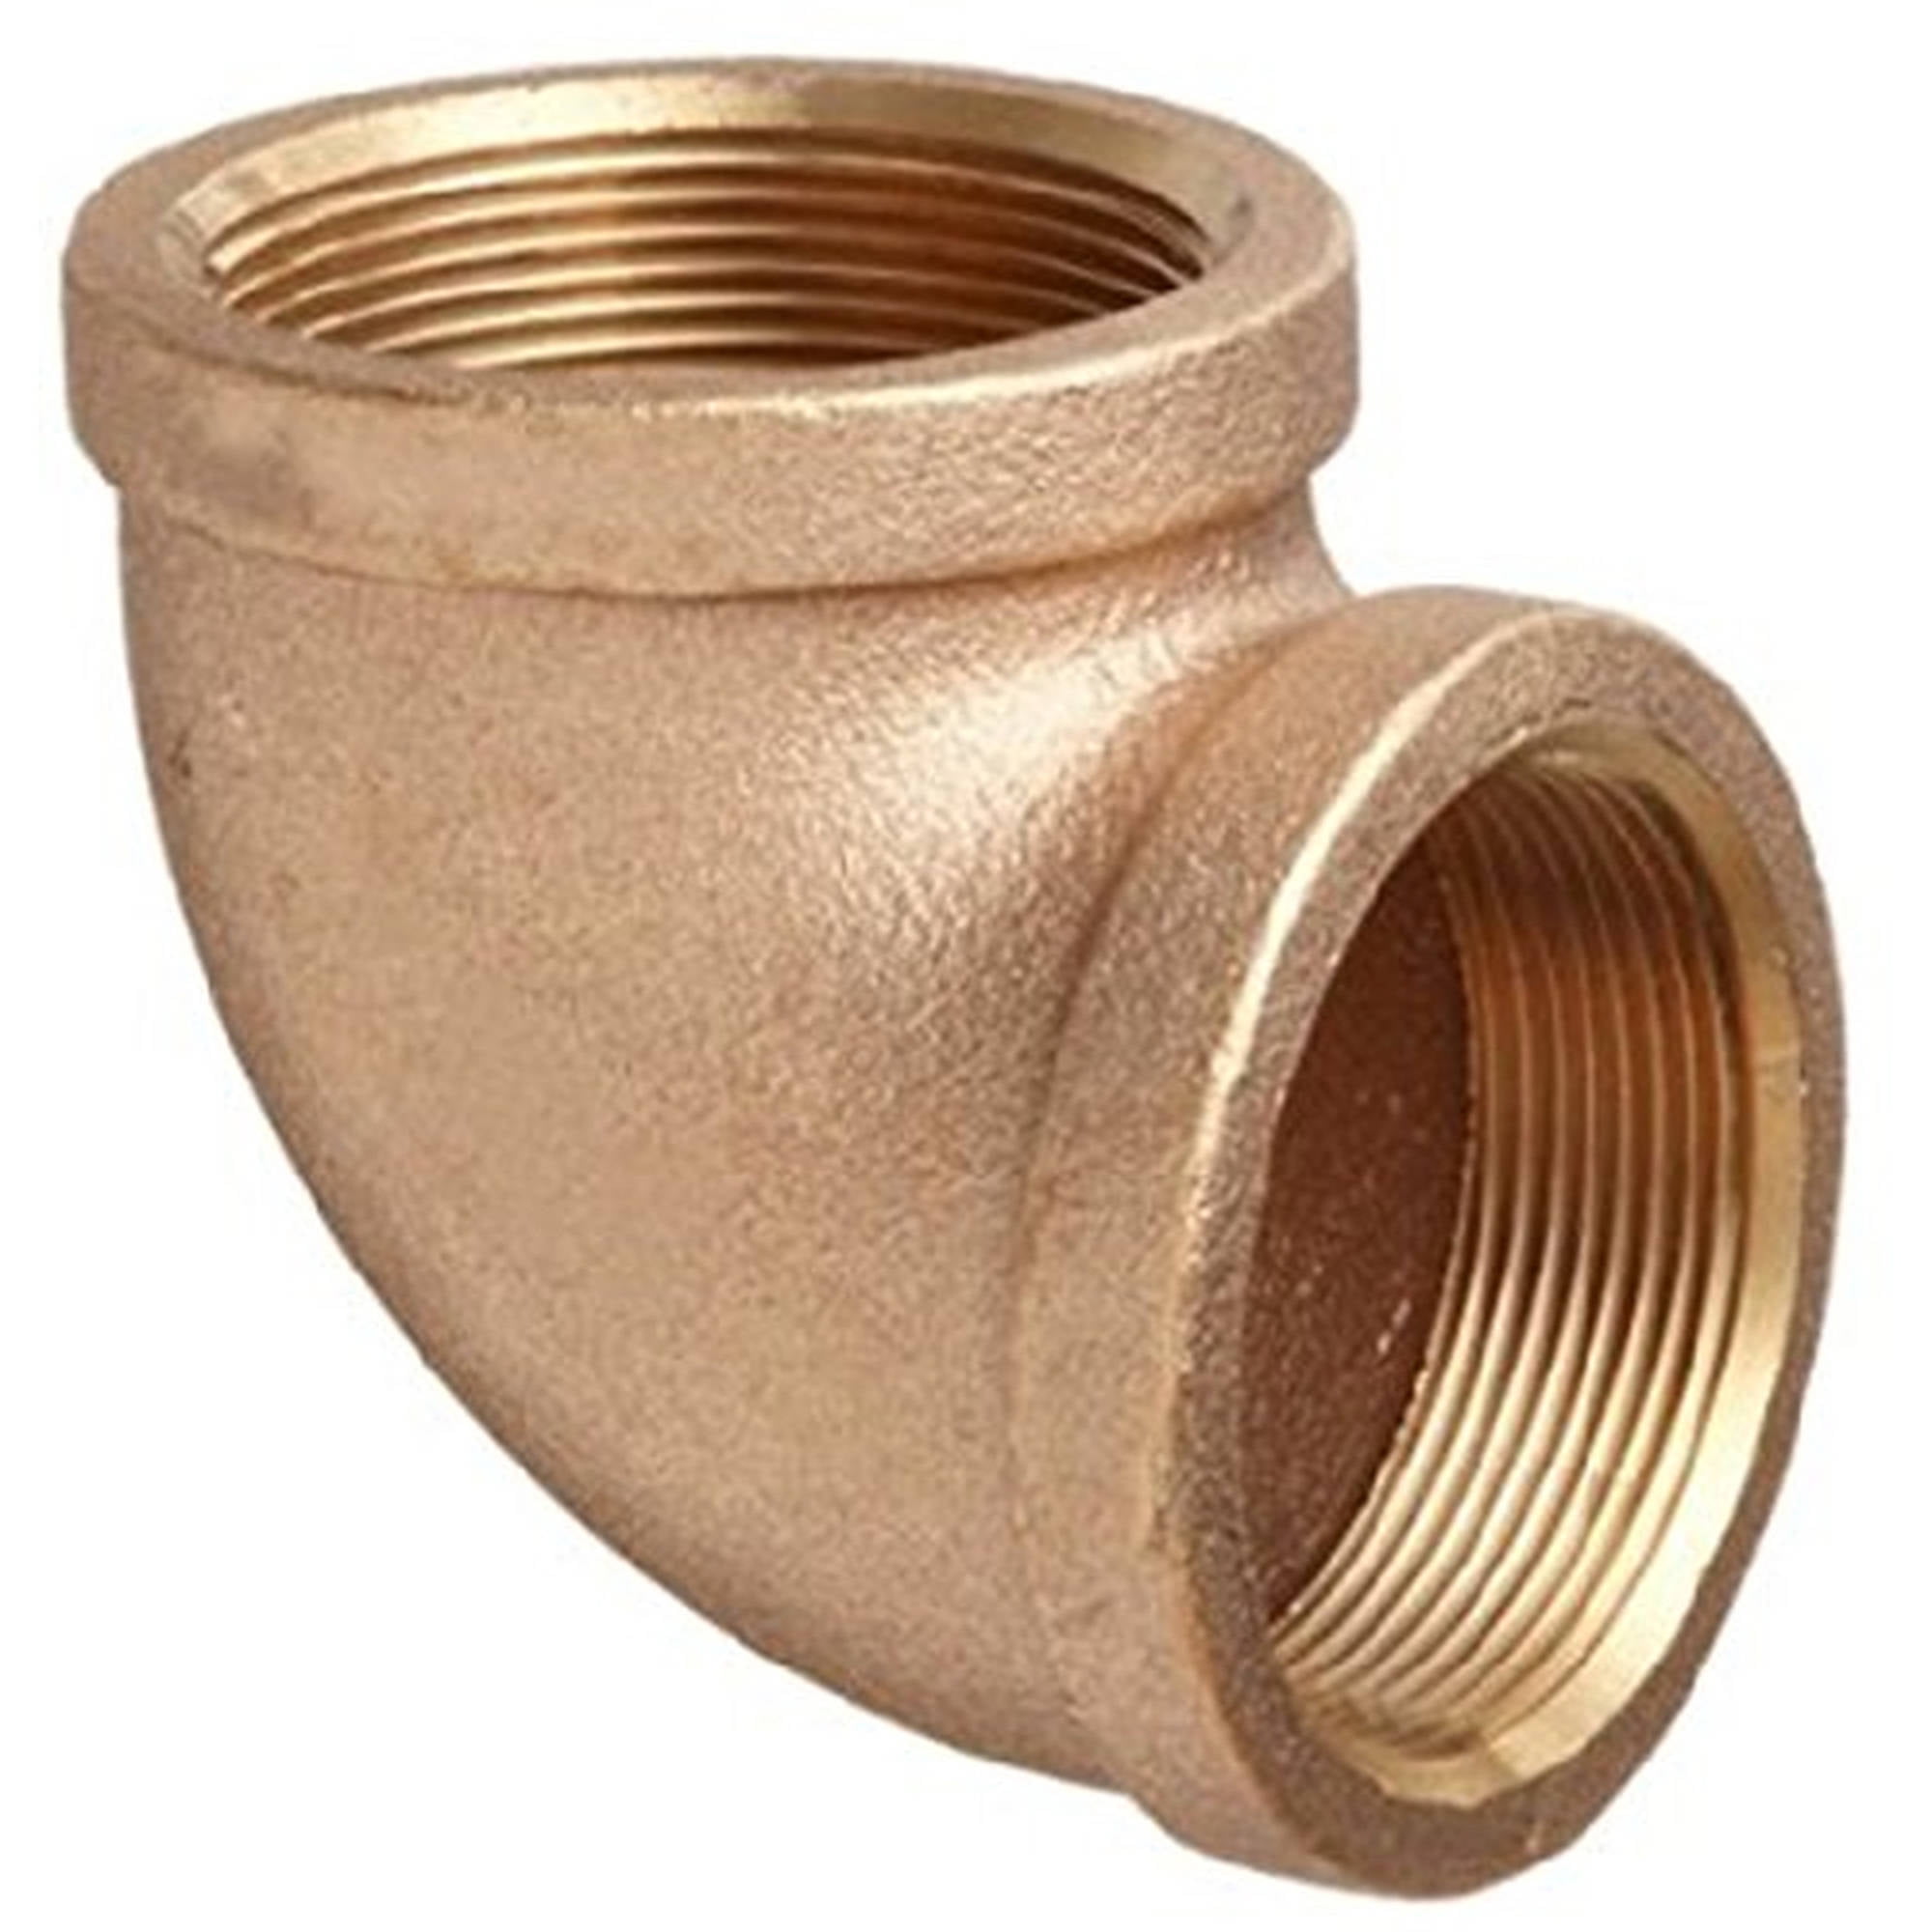 Everflow BRSN0200-NL 2-Inch Brass Street Elbow 90 Degrees Lead Free with Male & Female National Pipe Taper Threaded Fittings Brass Construction Higher Corrosion Resistance Economical & Easy to Install 